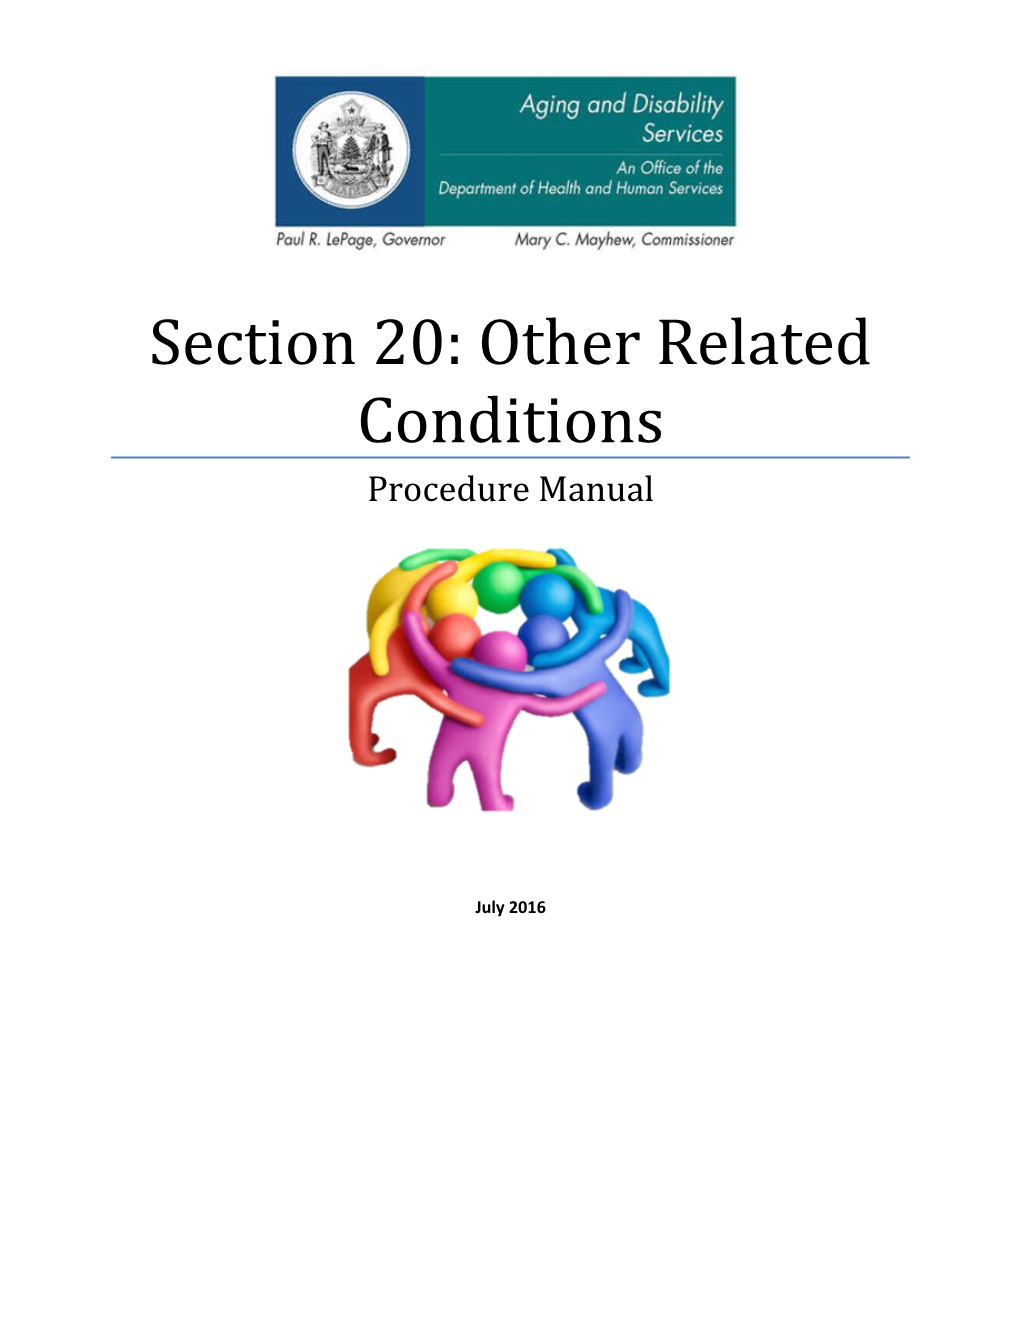 Section 20: Other Related Conditions